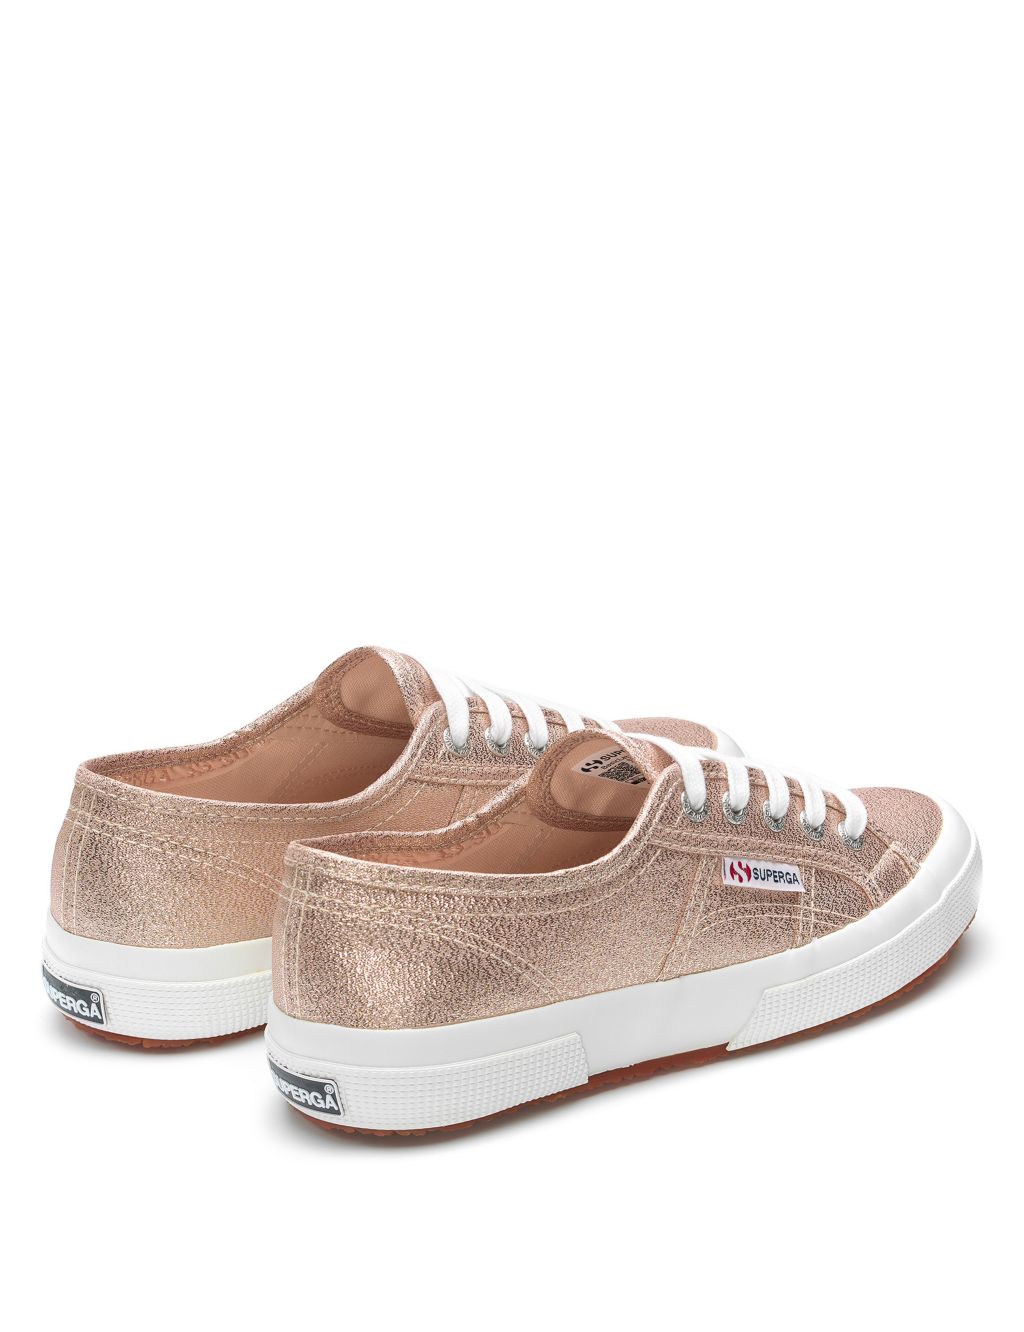 Canvas Lace Up Glitter Trainers image 5